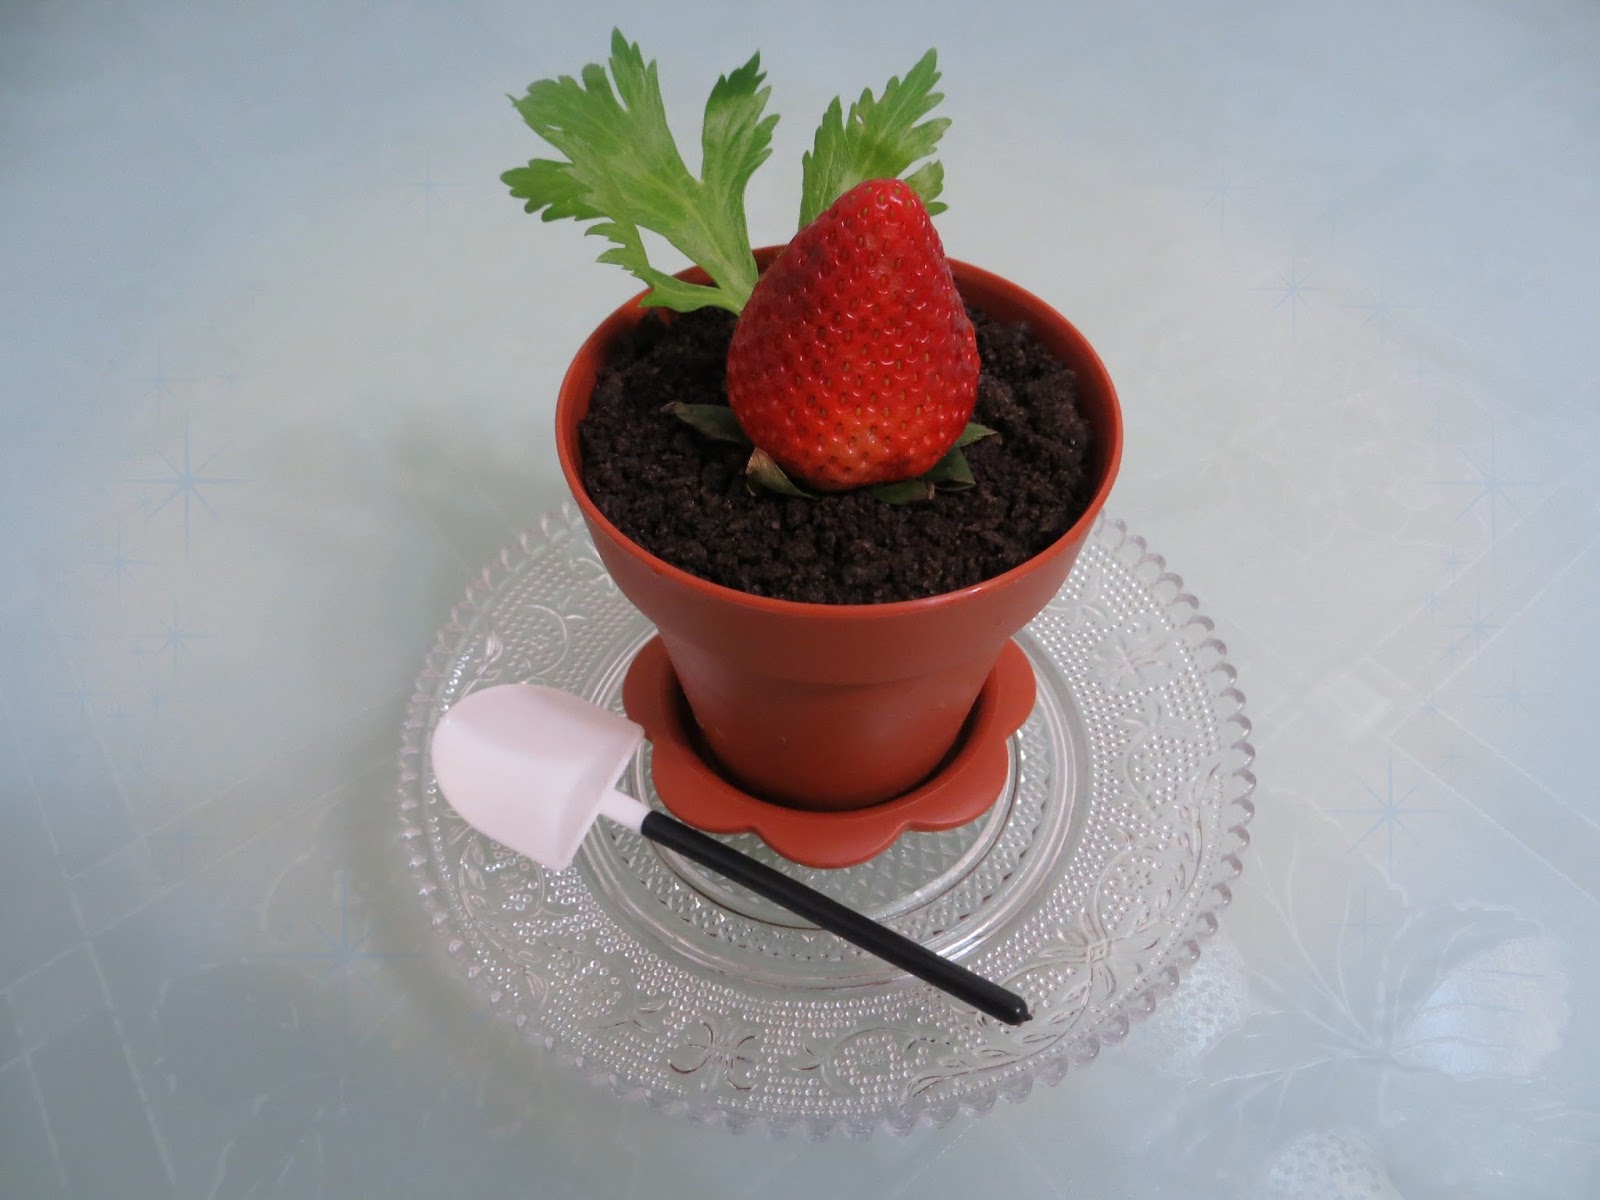 Violet's Kitchen ~♥紫羅蘭的爱心厨房♥~ : 盆栽巧克力布丁 Potted Plant Chocolate Pudding